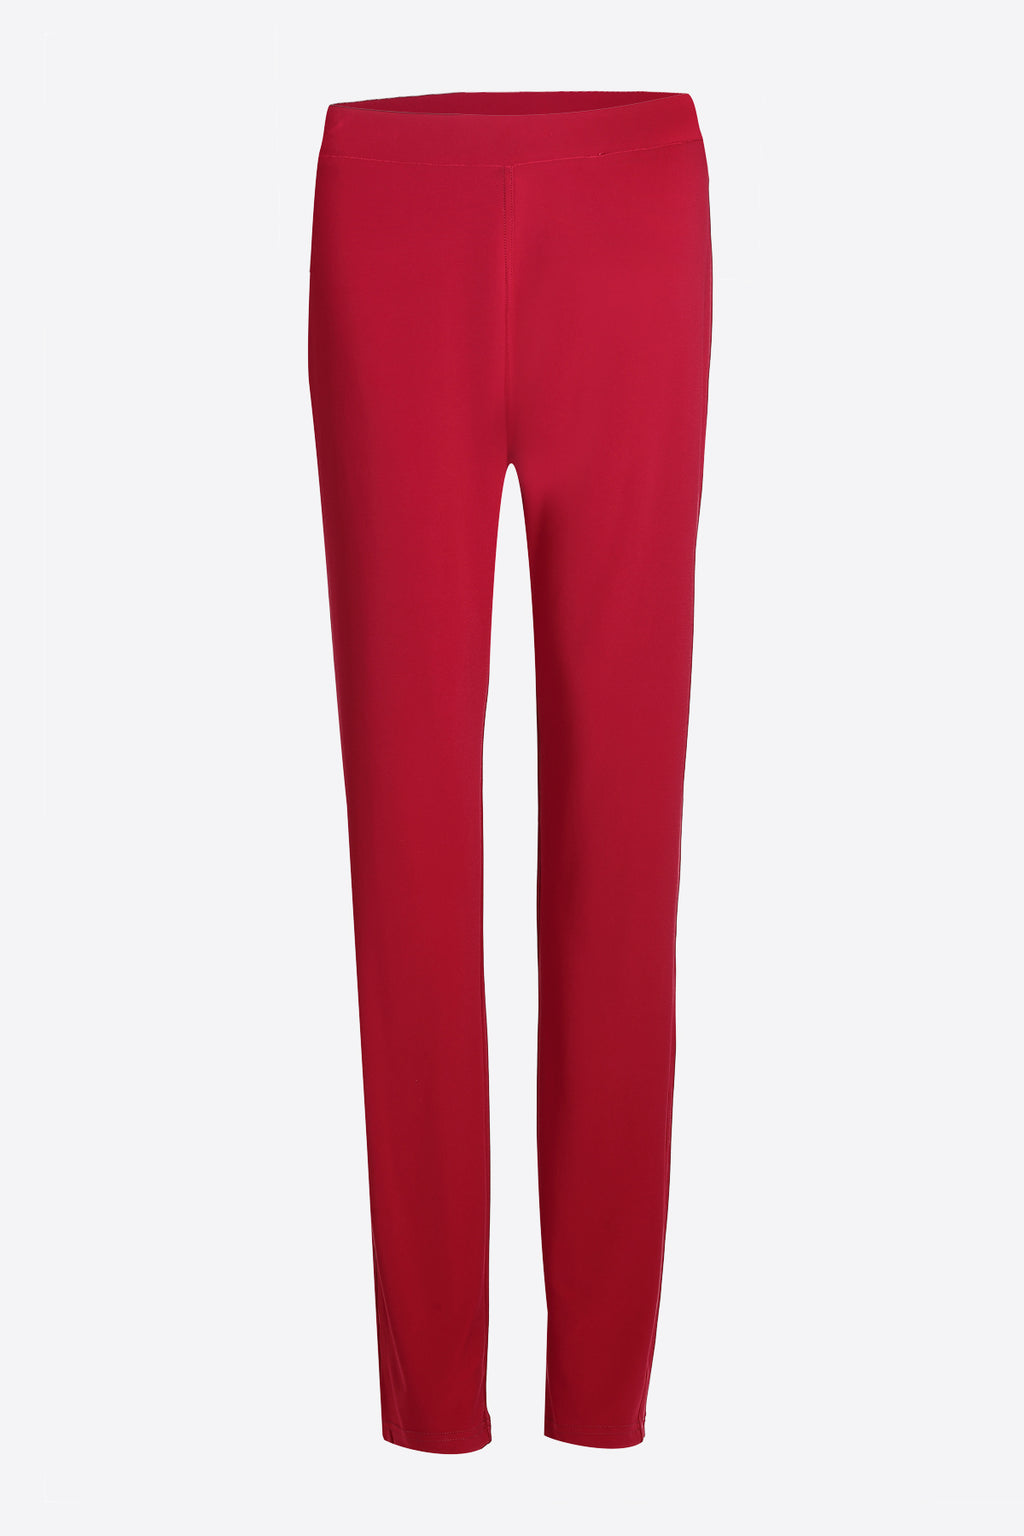 Cropped Pocket Pants (Red) - Women's Clothing -ROSARINI